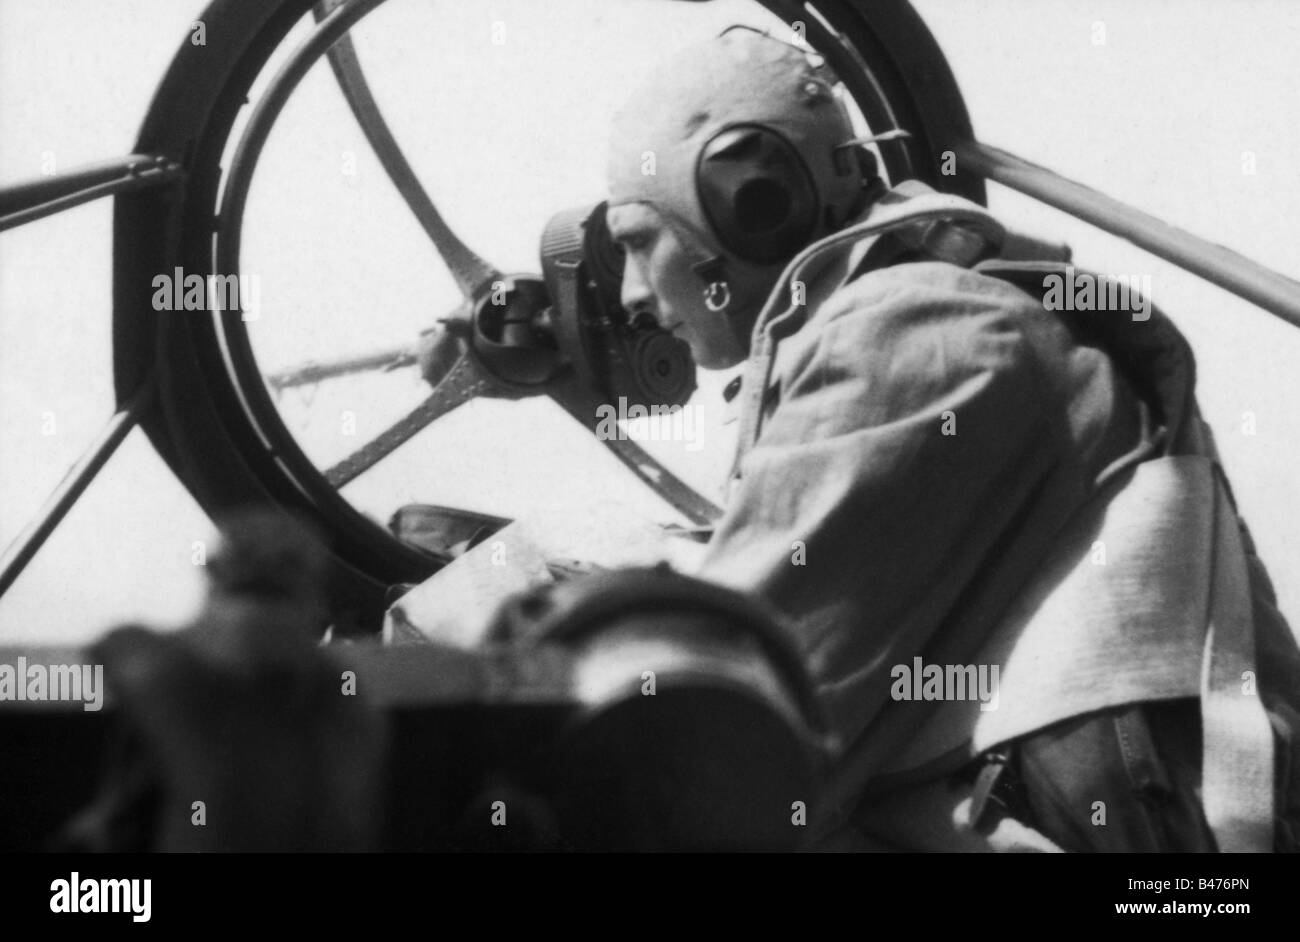 events, Second World War / WWII, aerial warfare, England, navigator in the cockpit of a German bomber Heinkel He 111, reading map, August 1940, bombers, flight station, He-111, He111, MG, Luftwaffe, Wehrmacht, 20th century, historic, historical, plane, planes, Germany, Third Reich, soldier, soldiers, aviator, aviators, Battle of Britain, bombardier, people, 1940s, Stock Photo